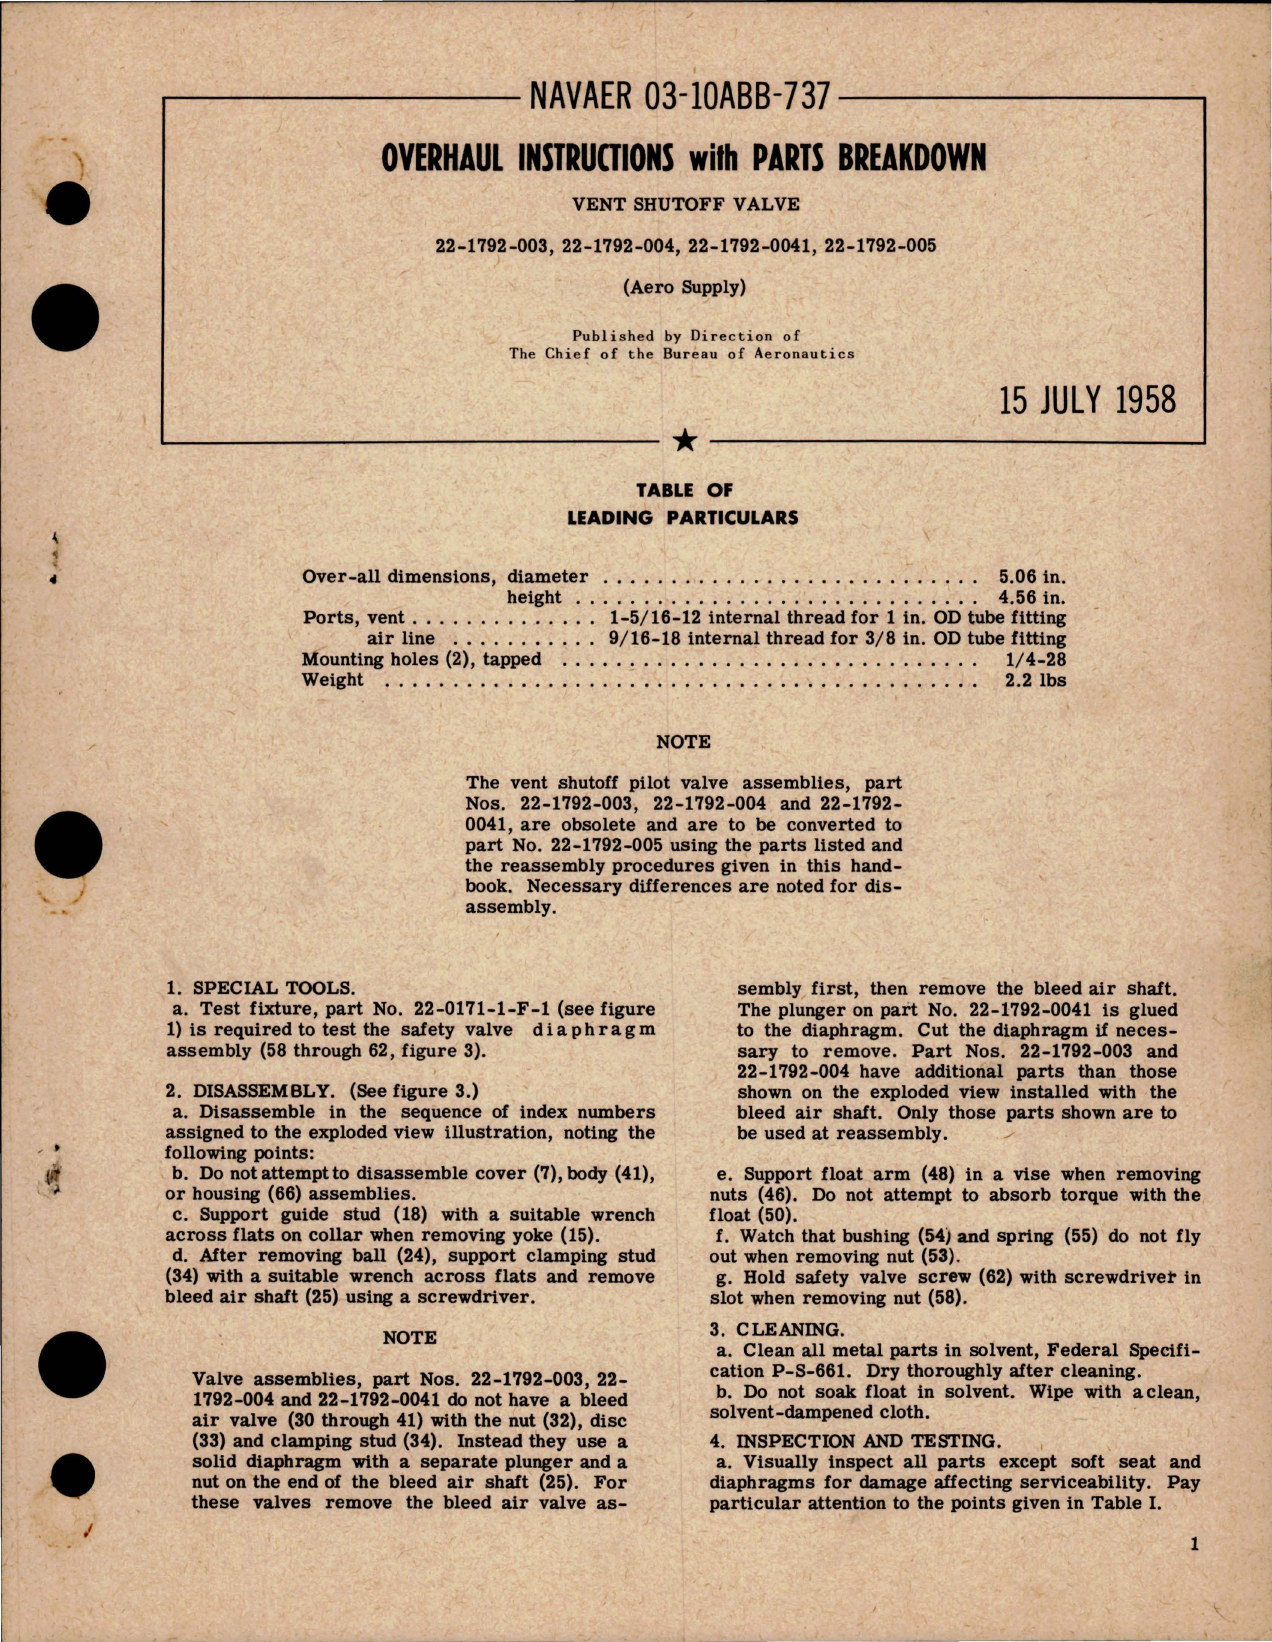 Sample page 1 from AirCorps Library document: Overhaul Instructions with Parts for Vent Shutoff Valve - 22-1792-003, 22-1792-004, 22-1792-0041 and 22-1792-005